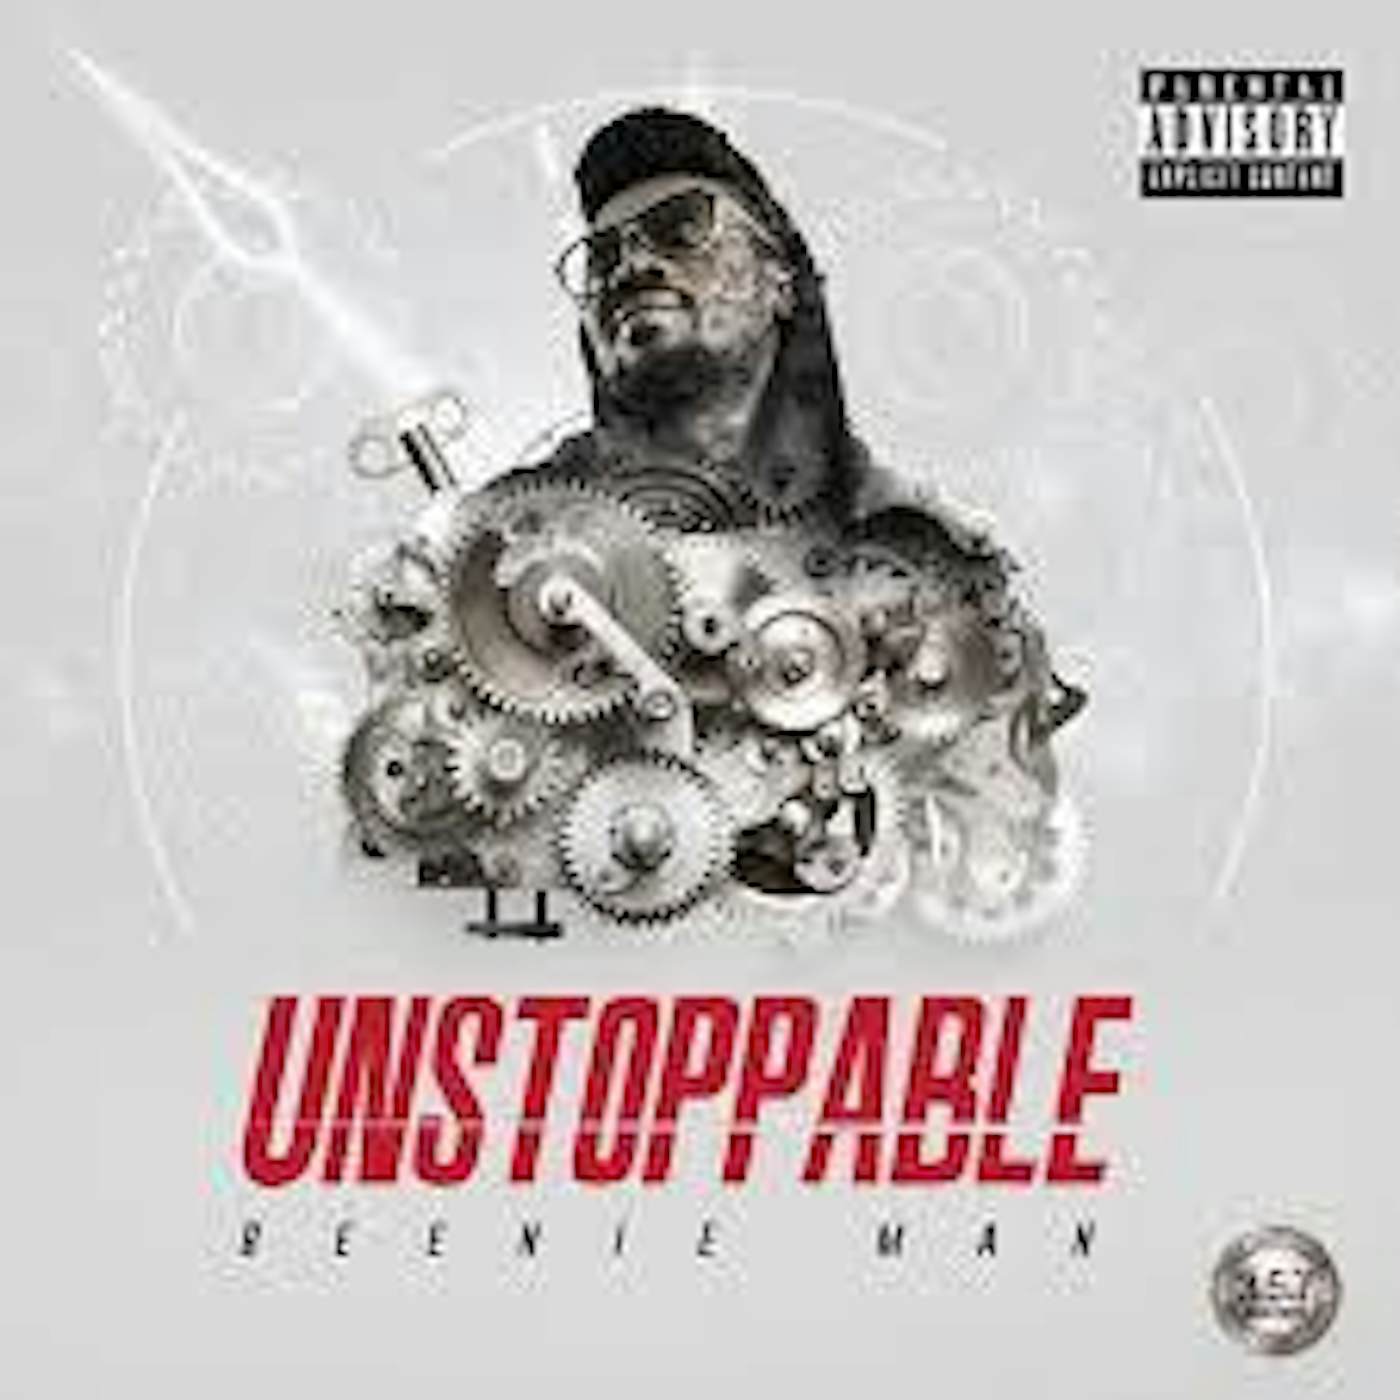 Beenie Man UNSTOPPABLE CD